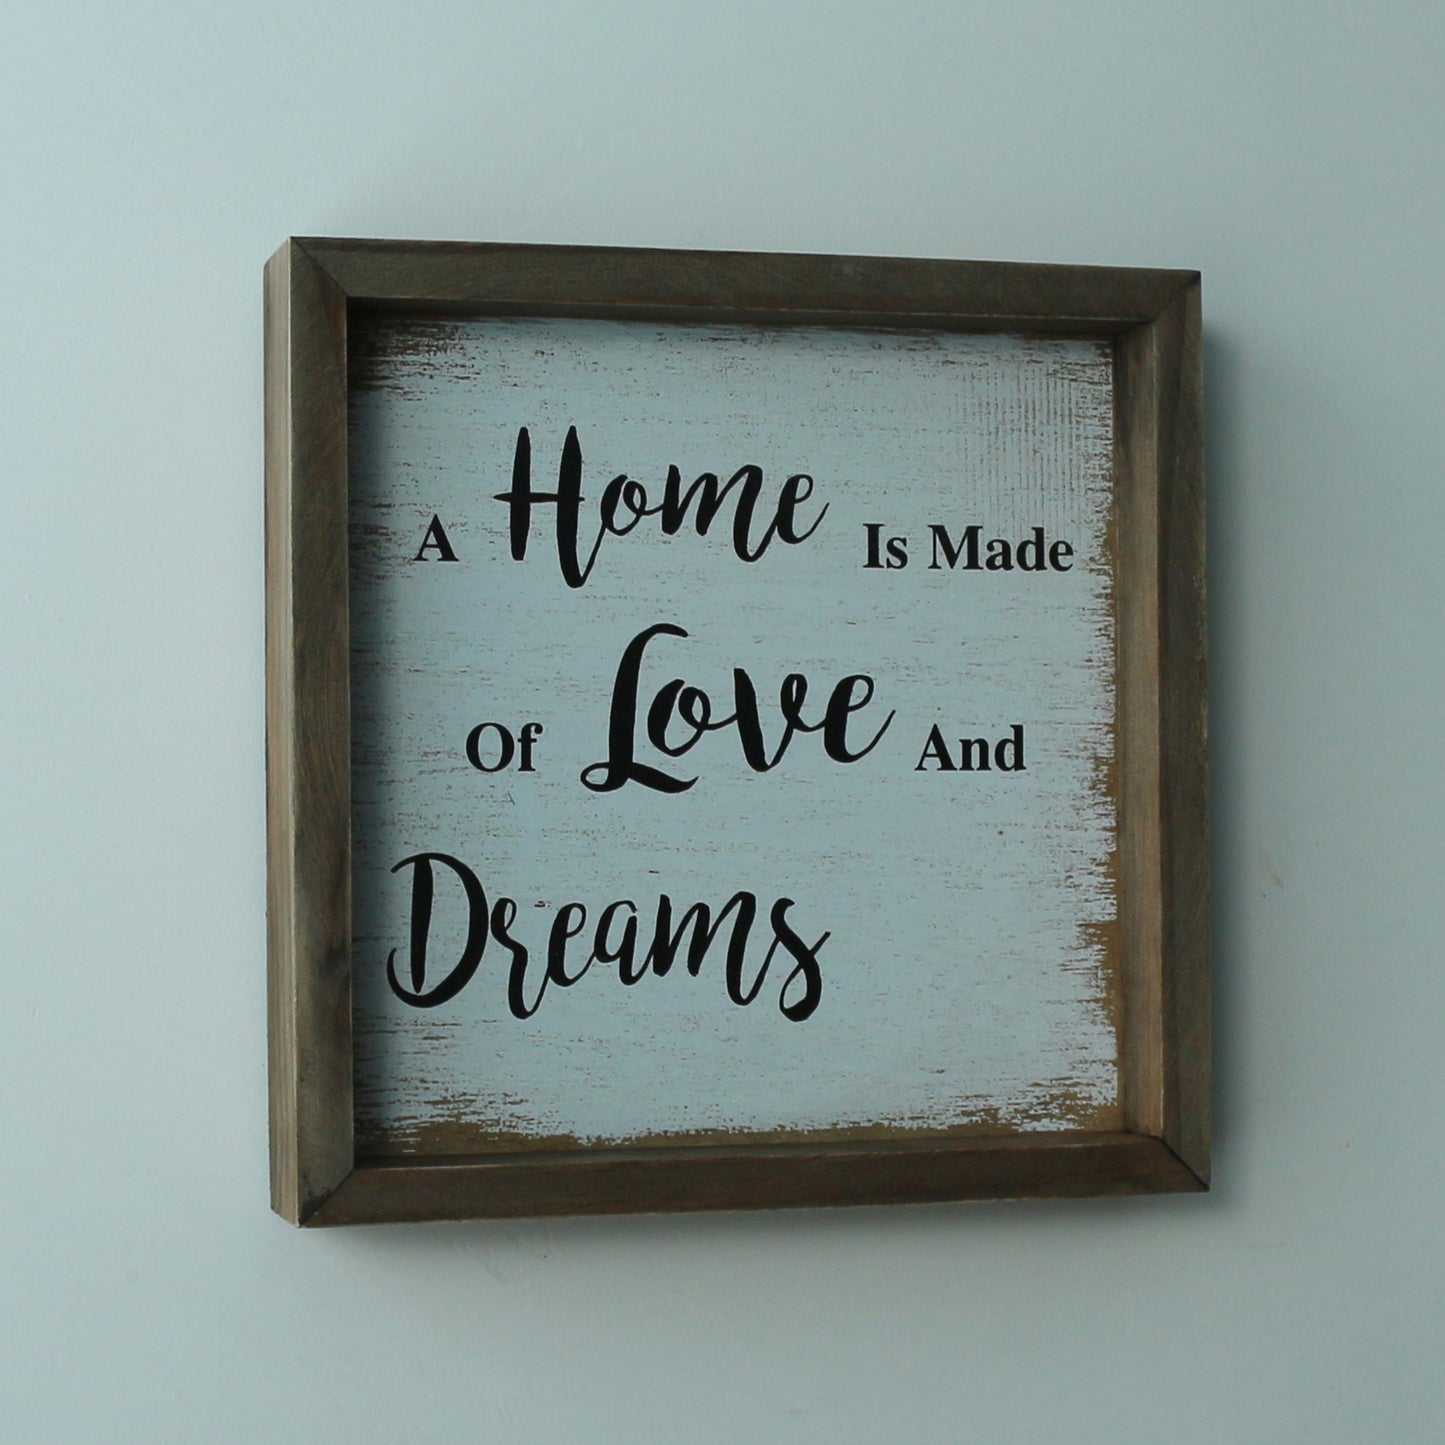 CVHOMEDECO. Vintage Distressed "A home is made of love and dreams" Shadow Box Frame Wall Mounted Hanging Decor Art, 9.75 x 9.75 Inch